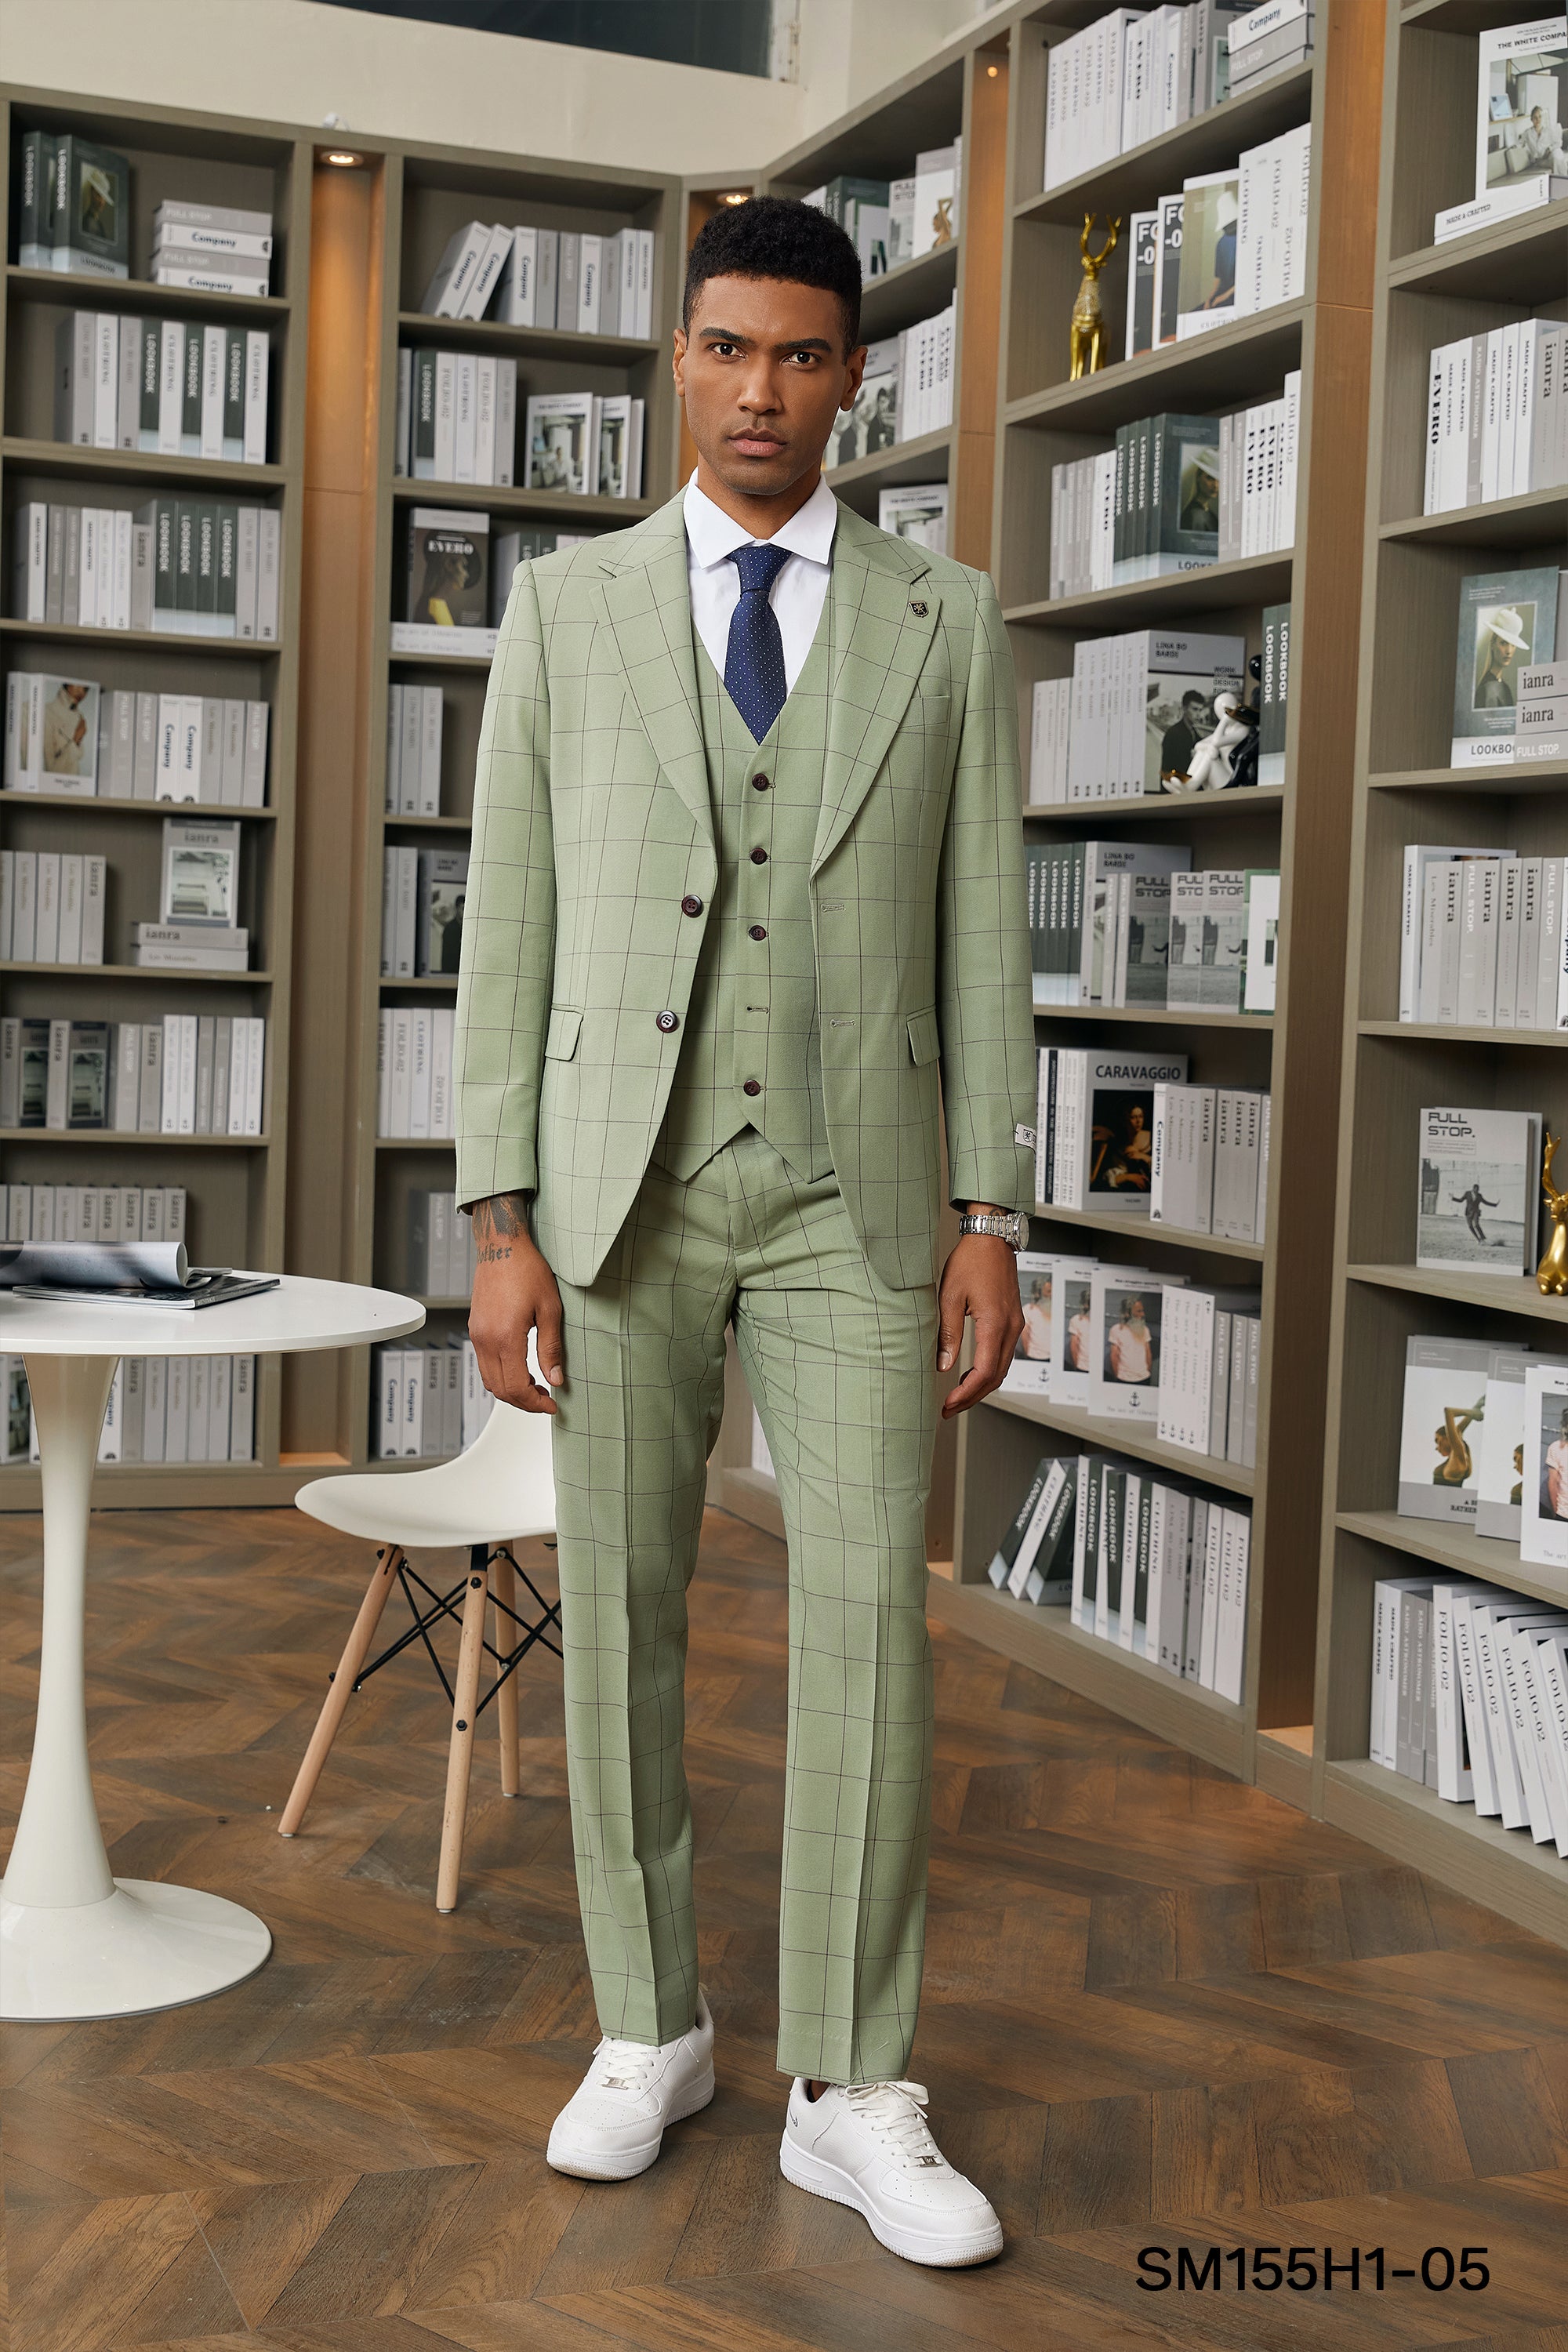 Stacy Adams Hybrid-Fit Vested Suit, Green Windowpane